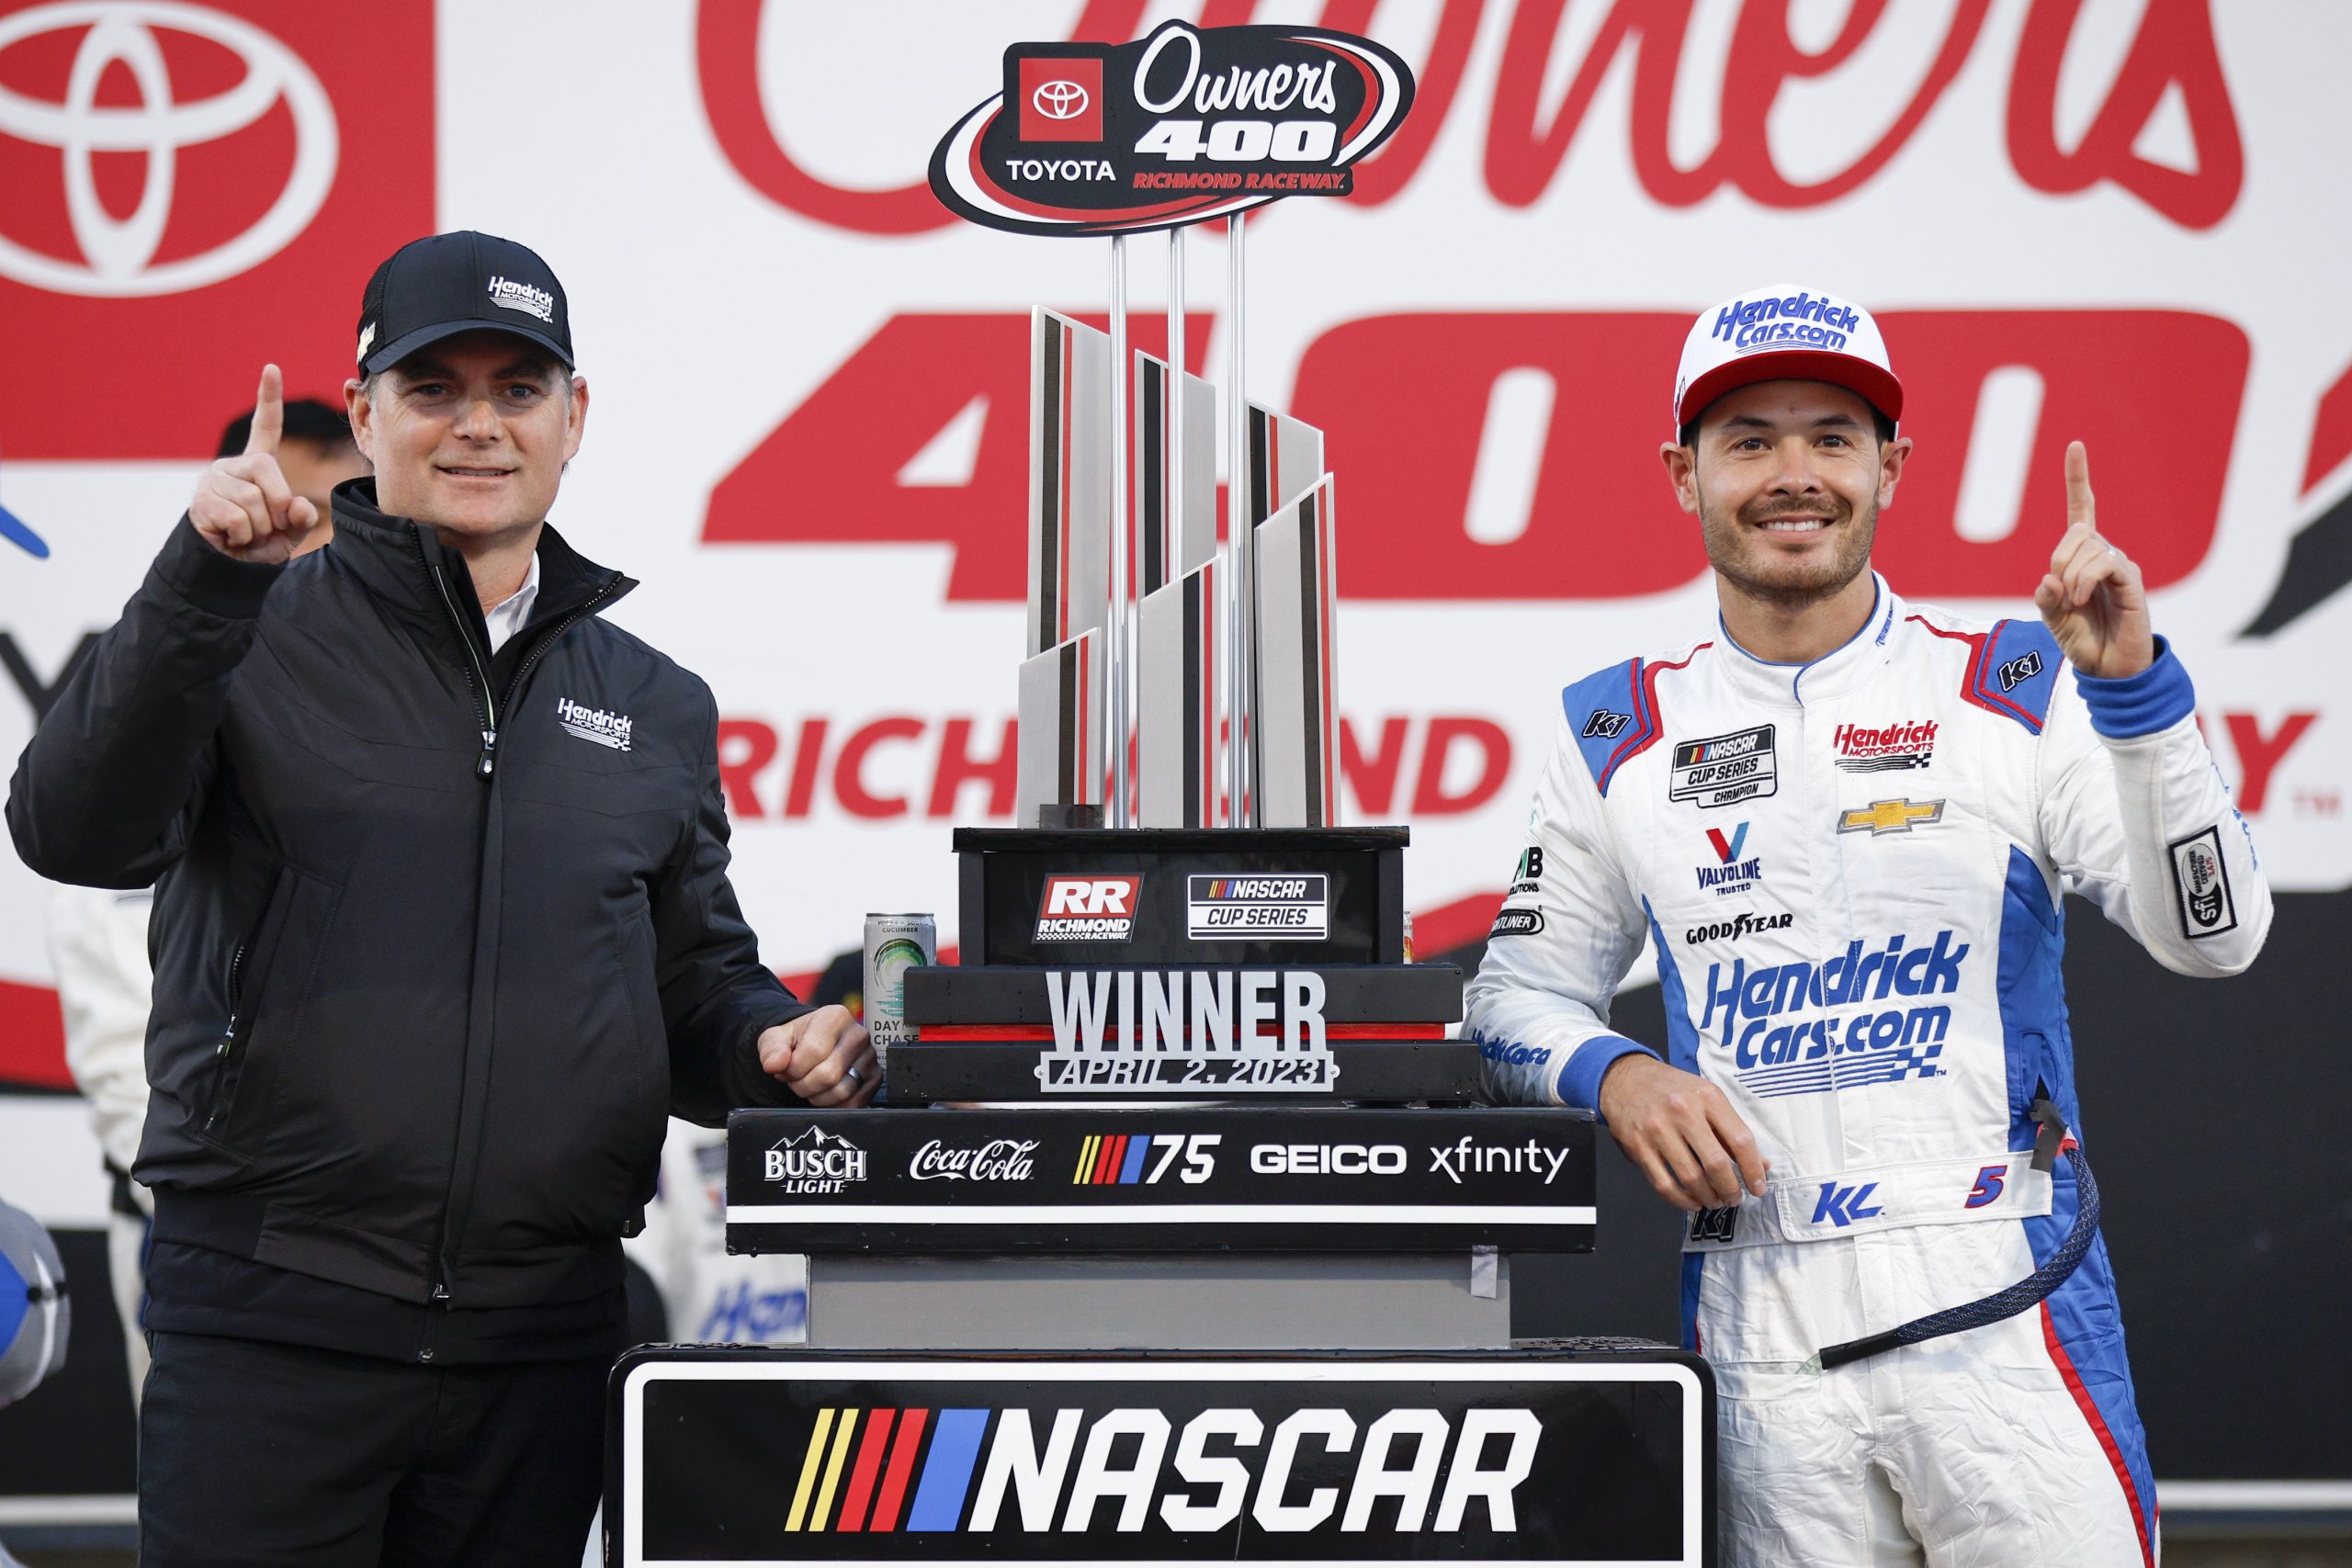 Credit: RICHMOND, VIRGINIA - APRIL 02: Kyle Larson, driver of the #5 HendrickCars.com Chevrolet, and Jeff Gordon, Vice Chairman of Hendrick Motorsports celebrate in victory lane after winning the NASCAR Cup Series Toyota Owners 400 at Richmond Raceway on April 02, 2023 in Richmond, Virginia. (Photo by Jared C. Tilton/Getty Images)